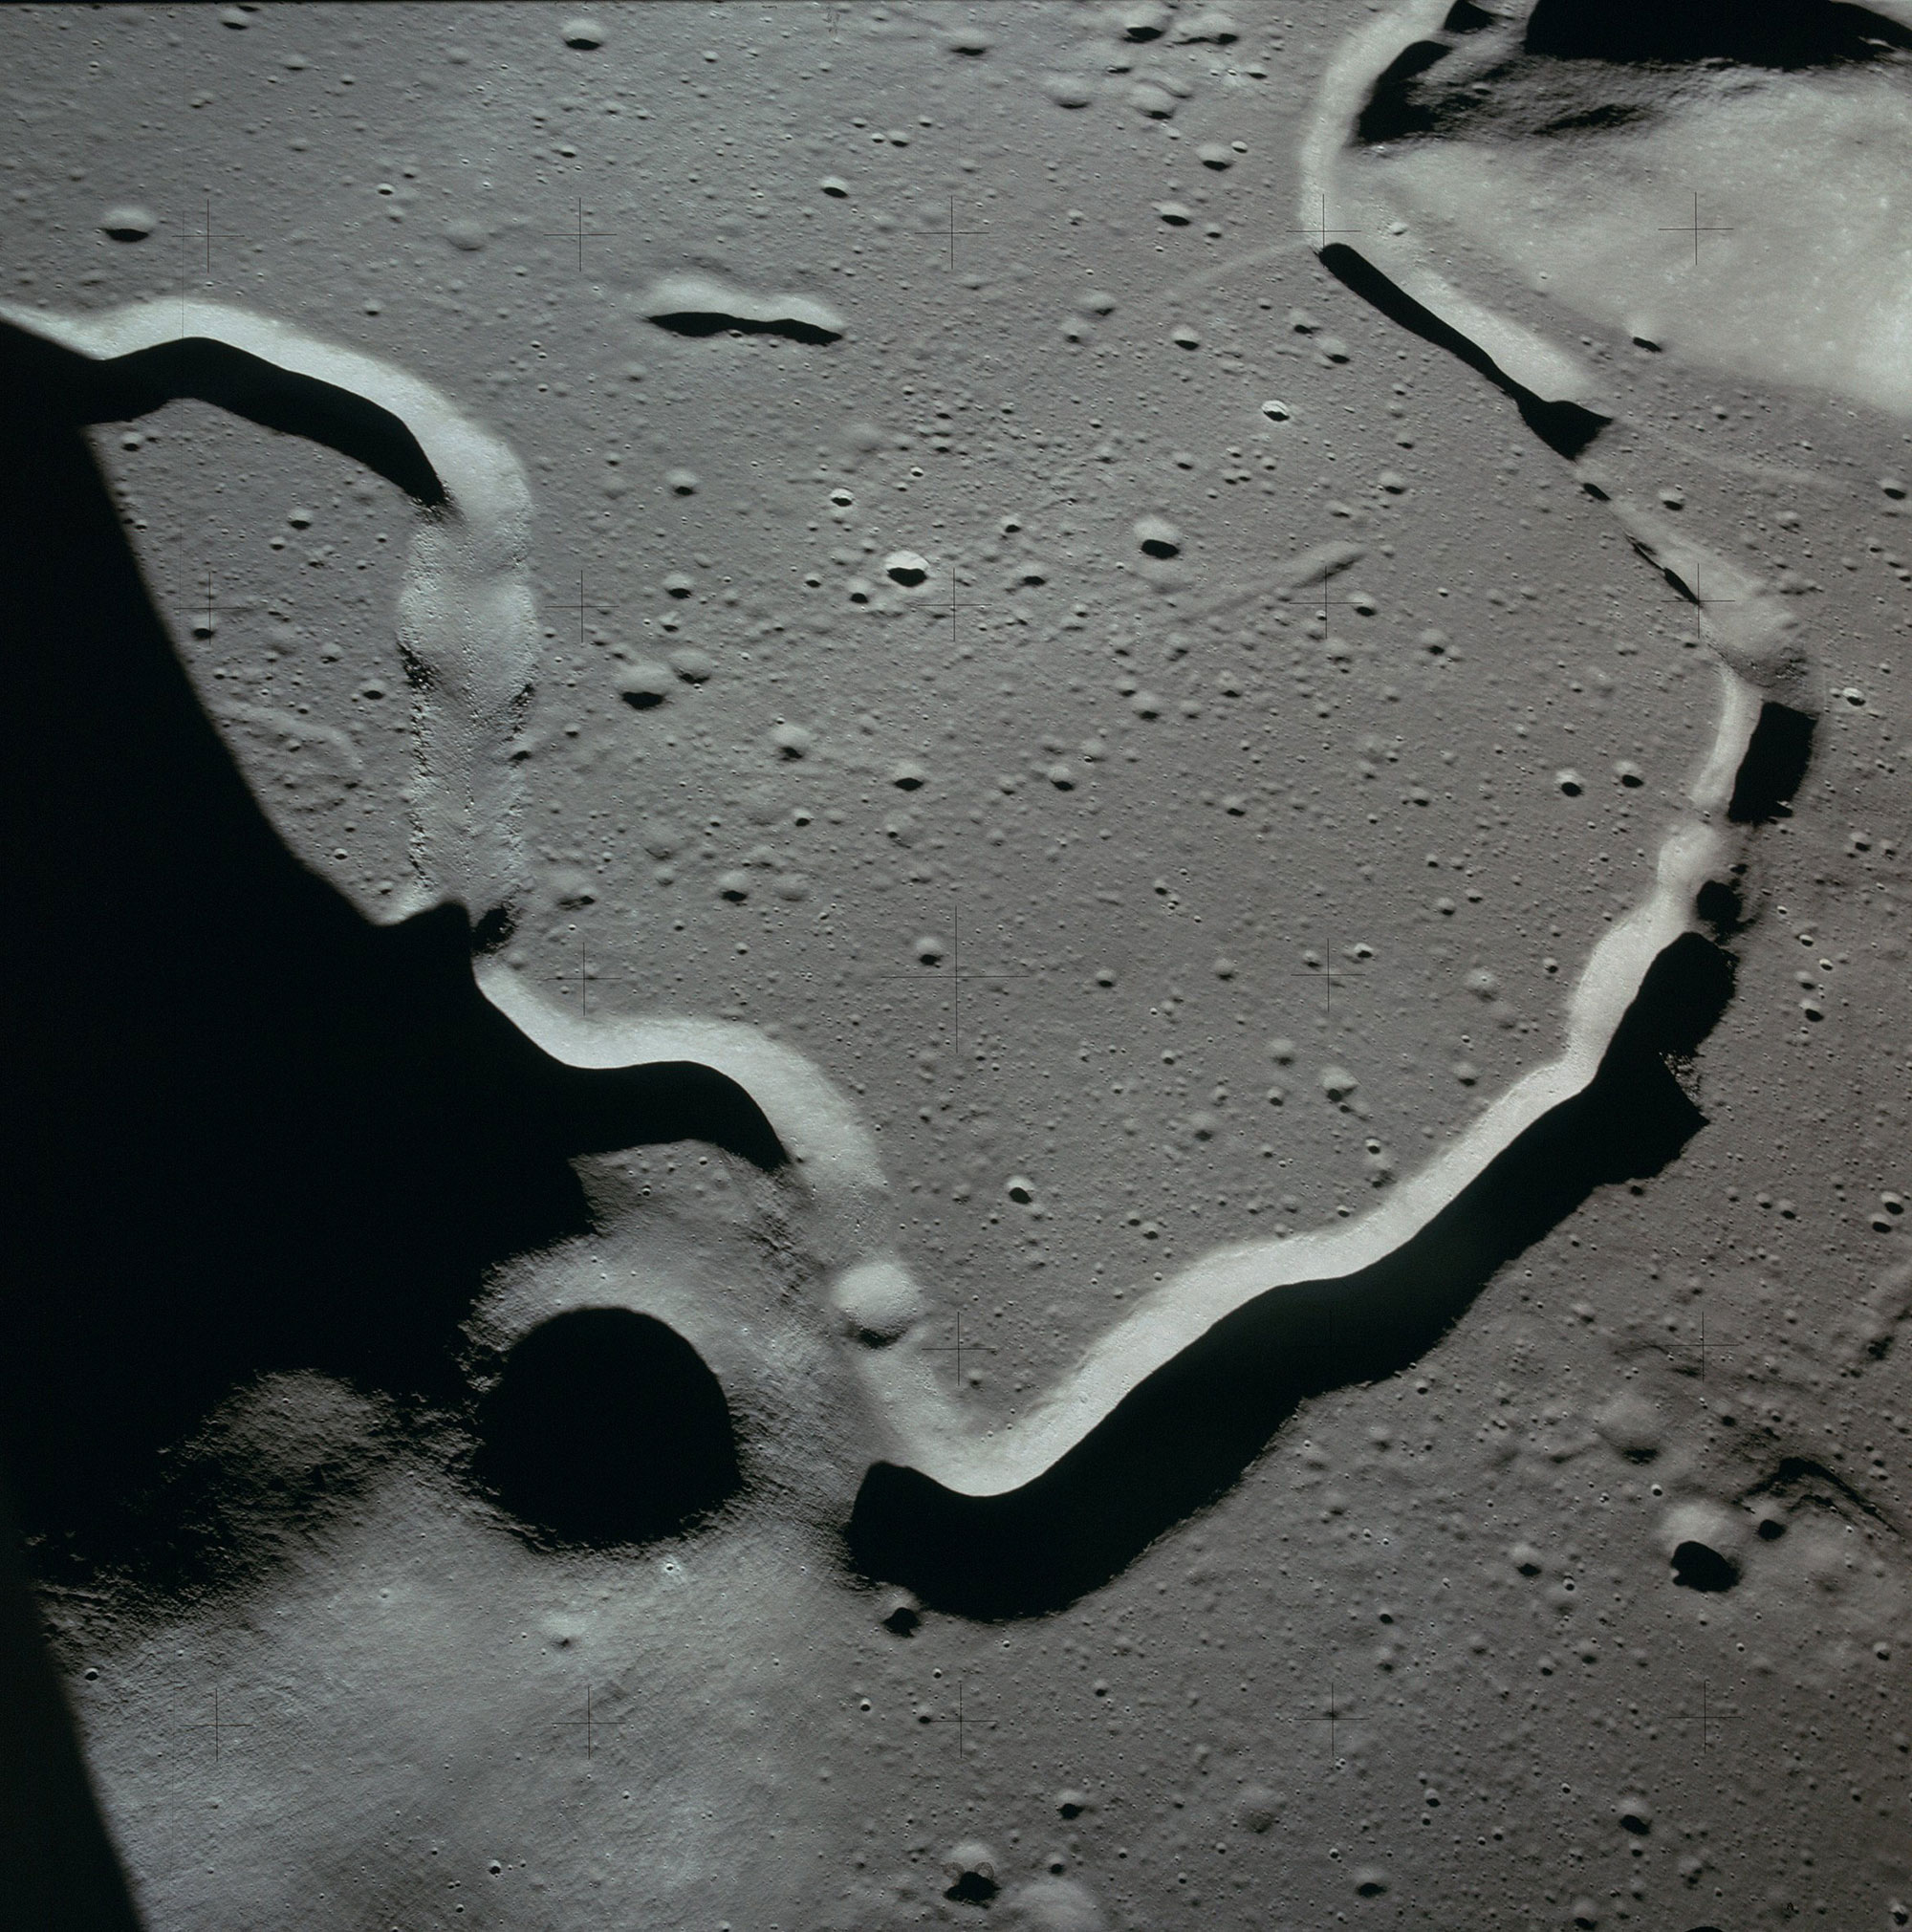 Hadley Rille as seen from orbit during the Apollo 15 mission. Credit: NASA via Retro Space Images